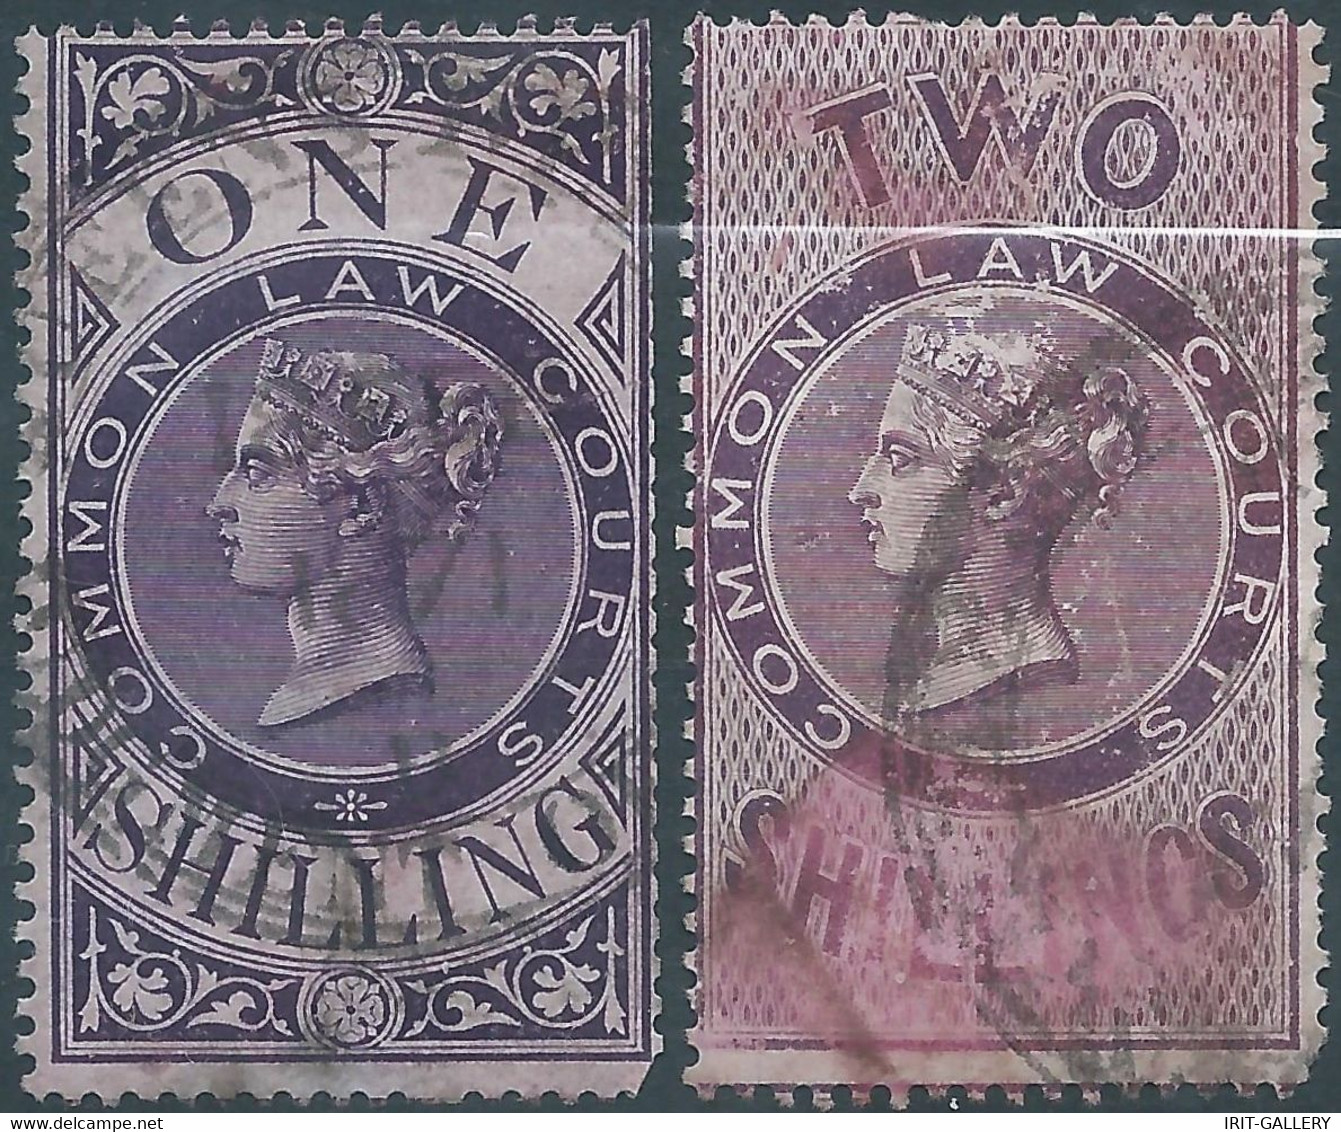 Great Britain-ENGLAND,Queen Victoria,Revenue Stamps Tax Fiscal COMMON LAW COURTS,1 & 2 Shillings,Used - Revenue Stamps